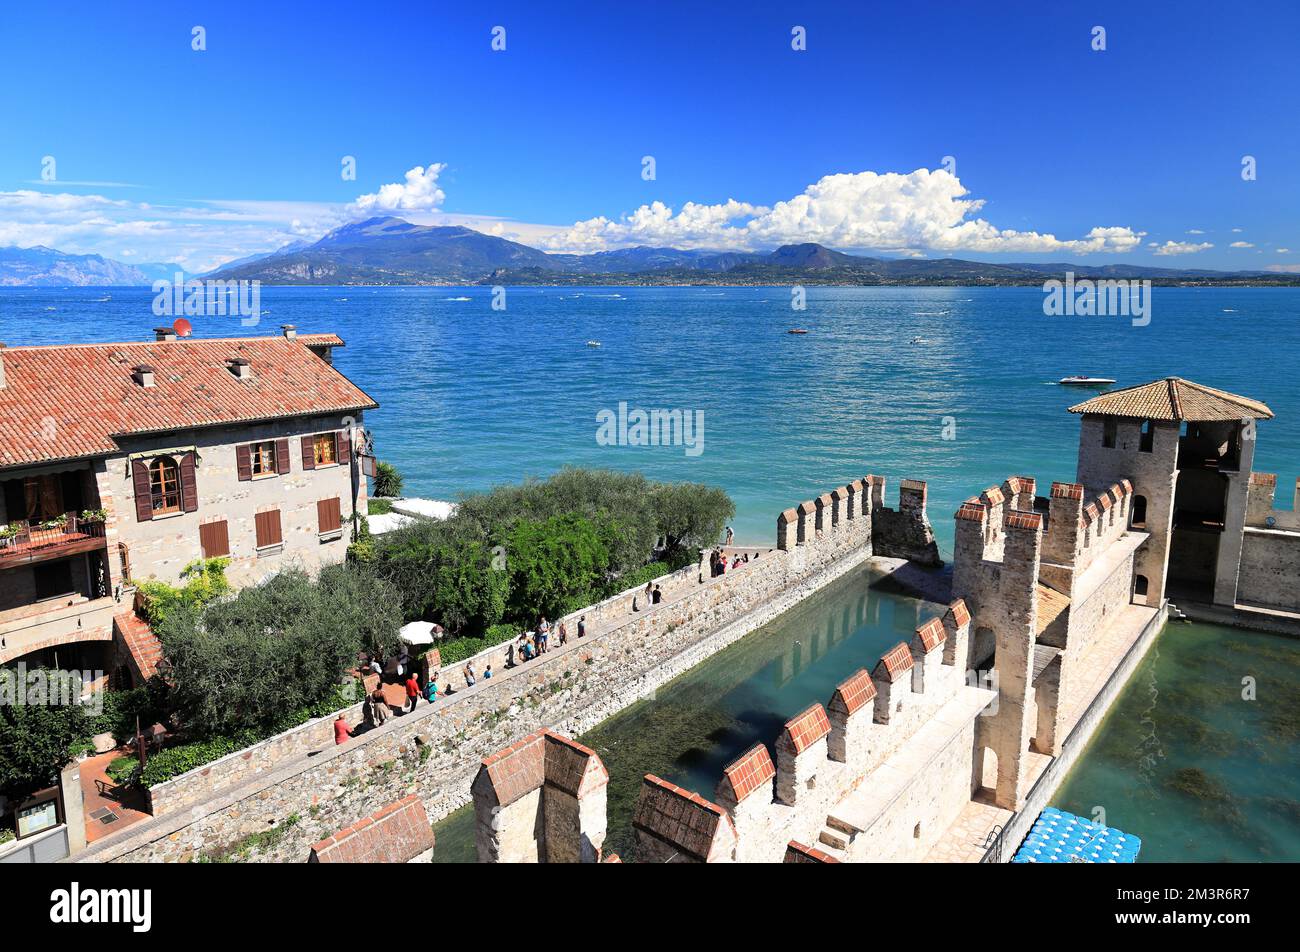 View of Lake Garda from the Sirmione Castle. Sirmione, Italy, Europe. Stock Photo